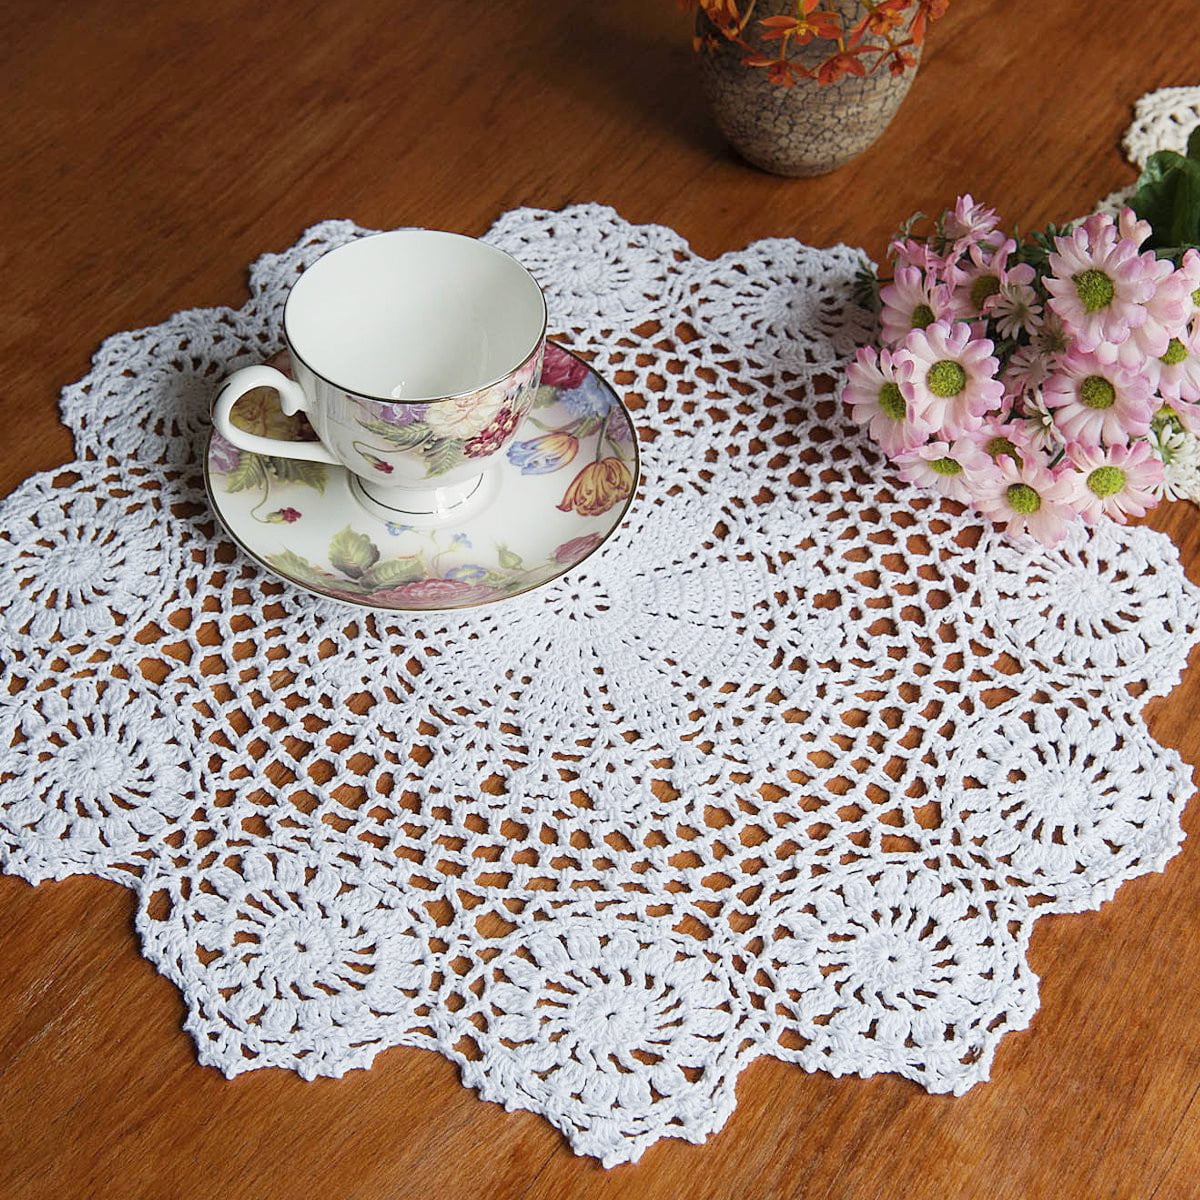 Heritage Lace Rose Pattern Placemats White Vintage New Doilies Doily Placemat 